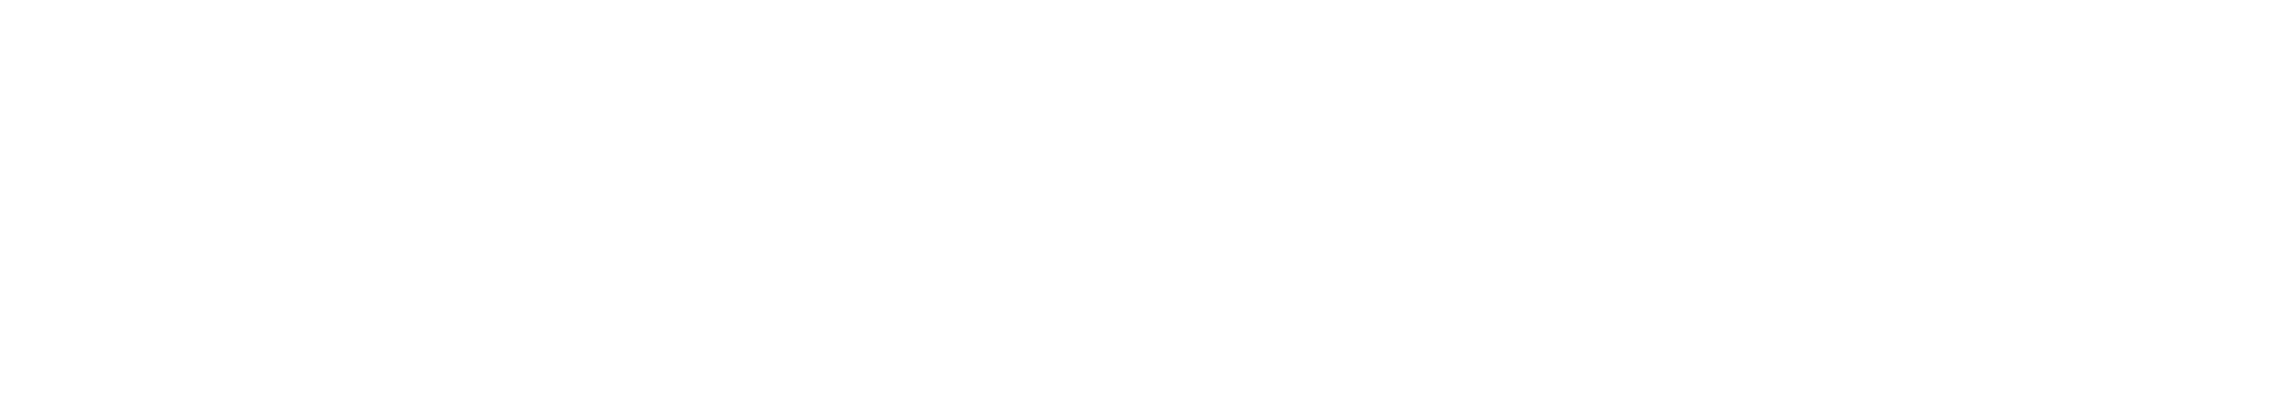 Star Tribune Logo - Police being forced to front lines of growing mental health crisis